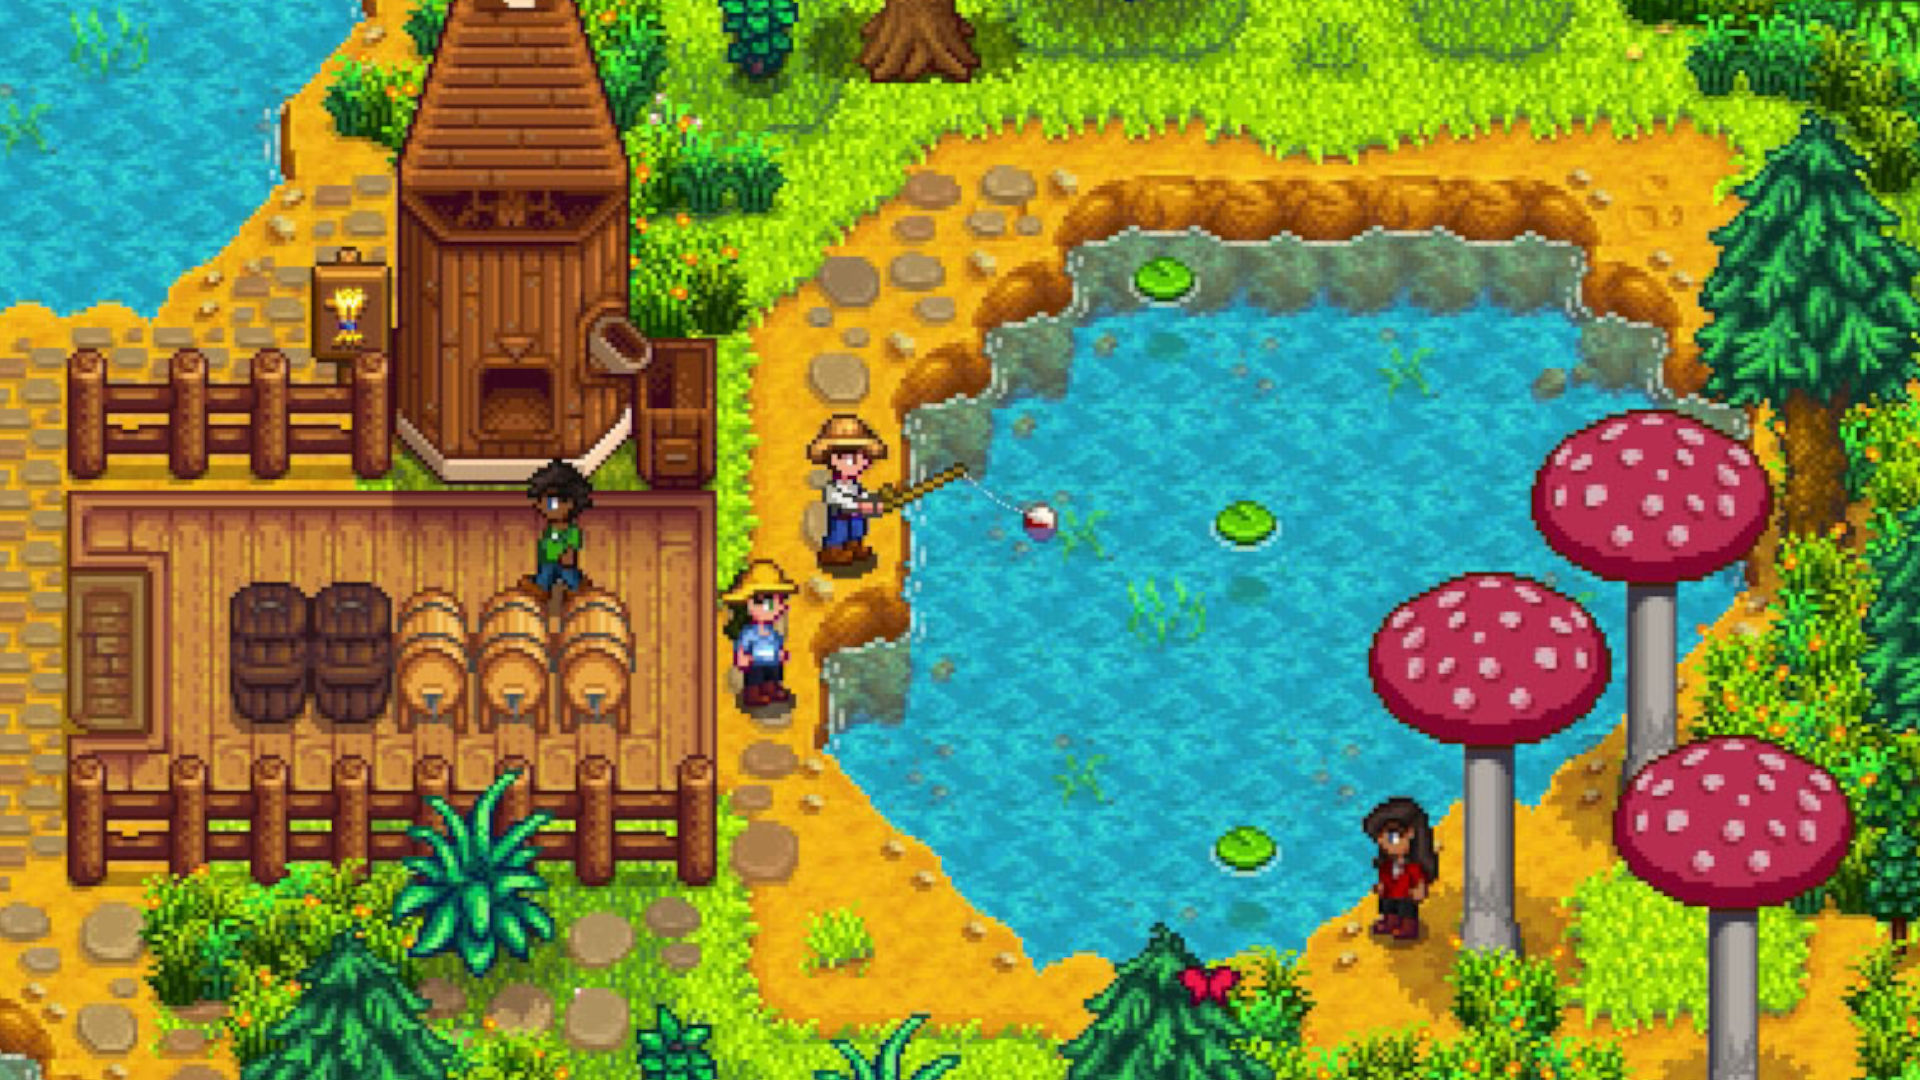 Stardew Valley review the game that saved my brain